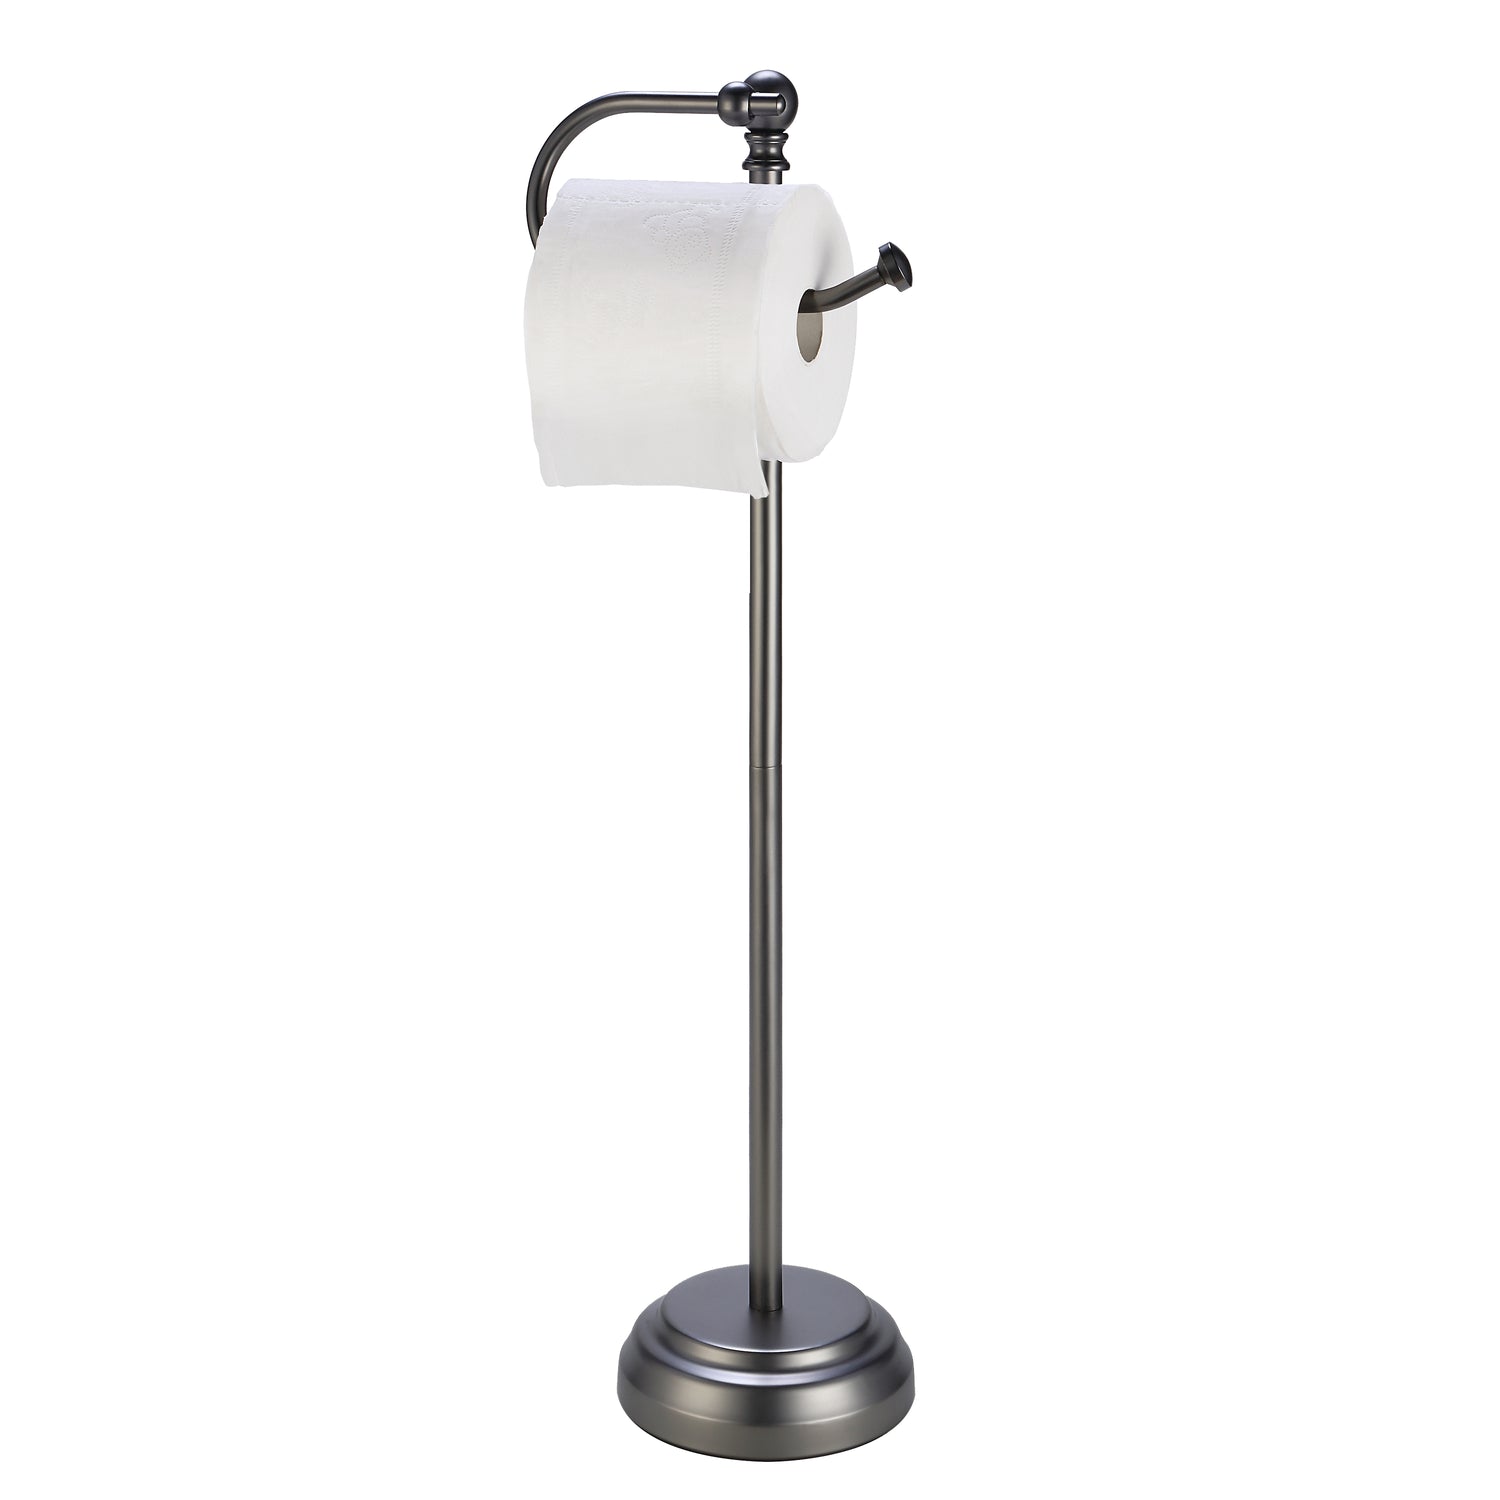 SunnyPoint Bathroom Free Standing Toilet Tissue Paper Roll Holder Stand  with Reserve Function, Chrome Finish 